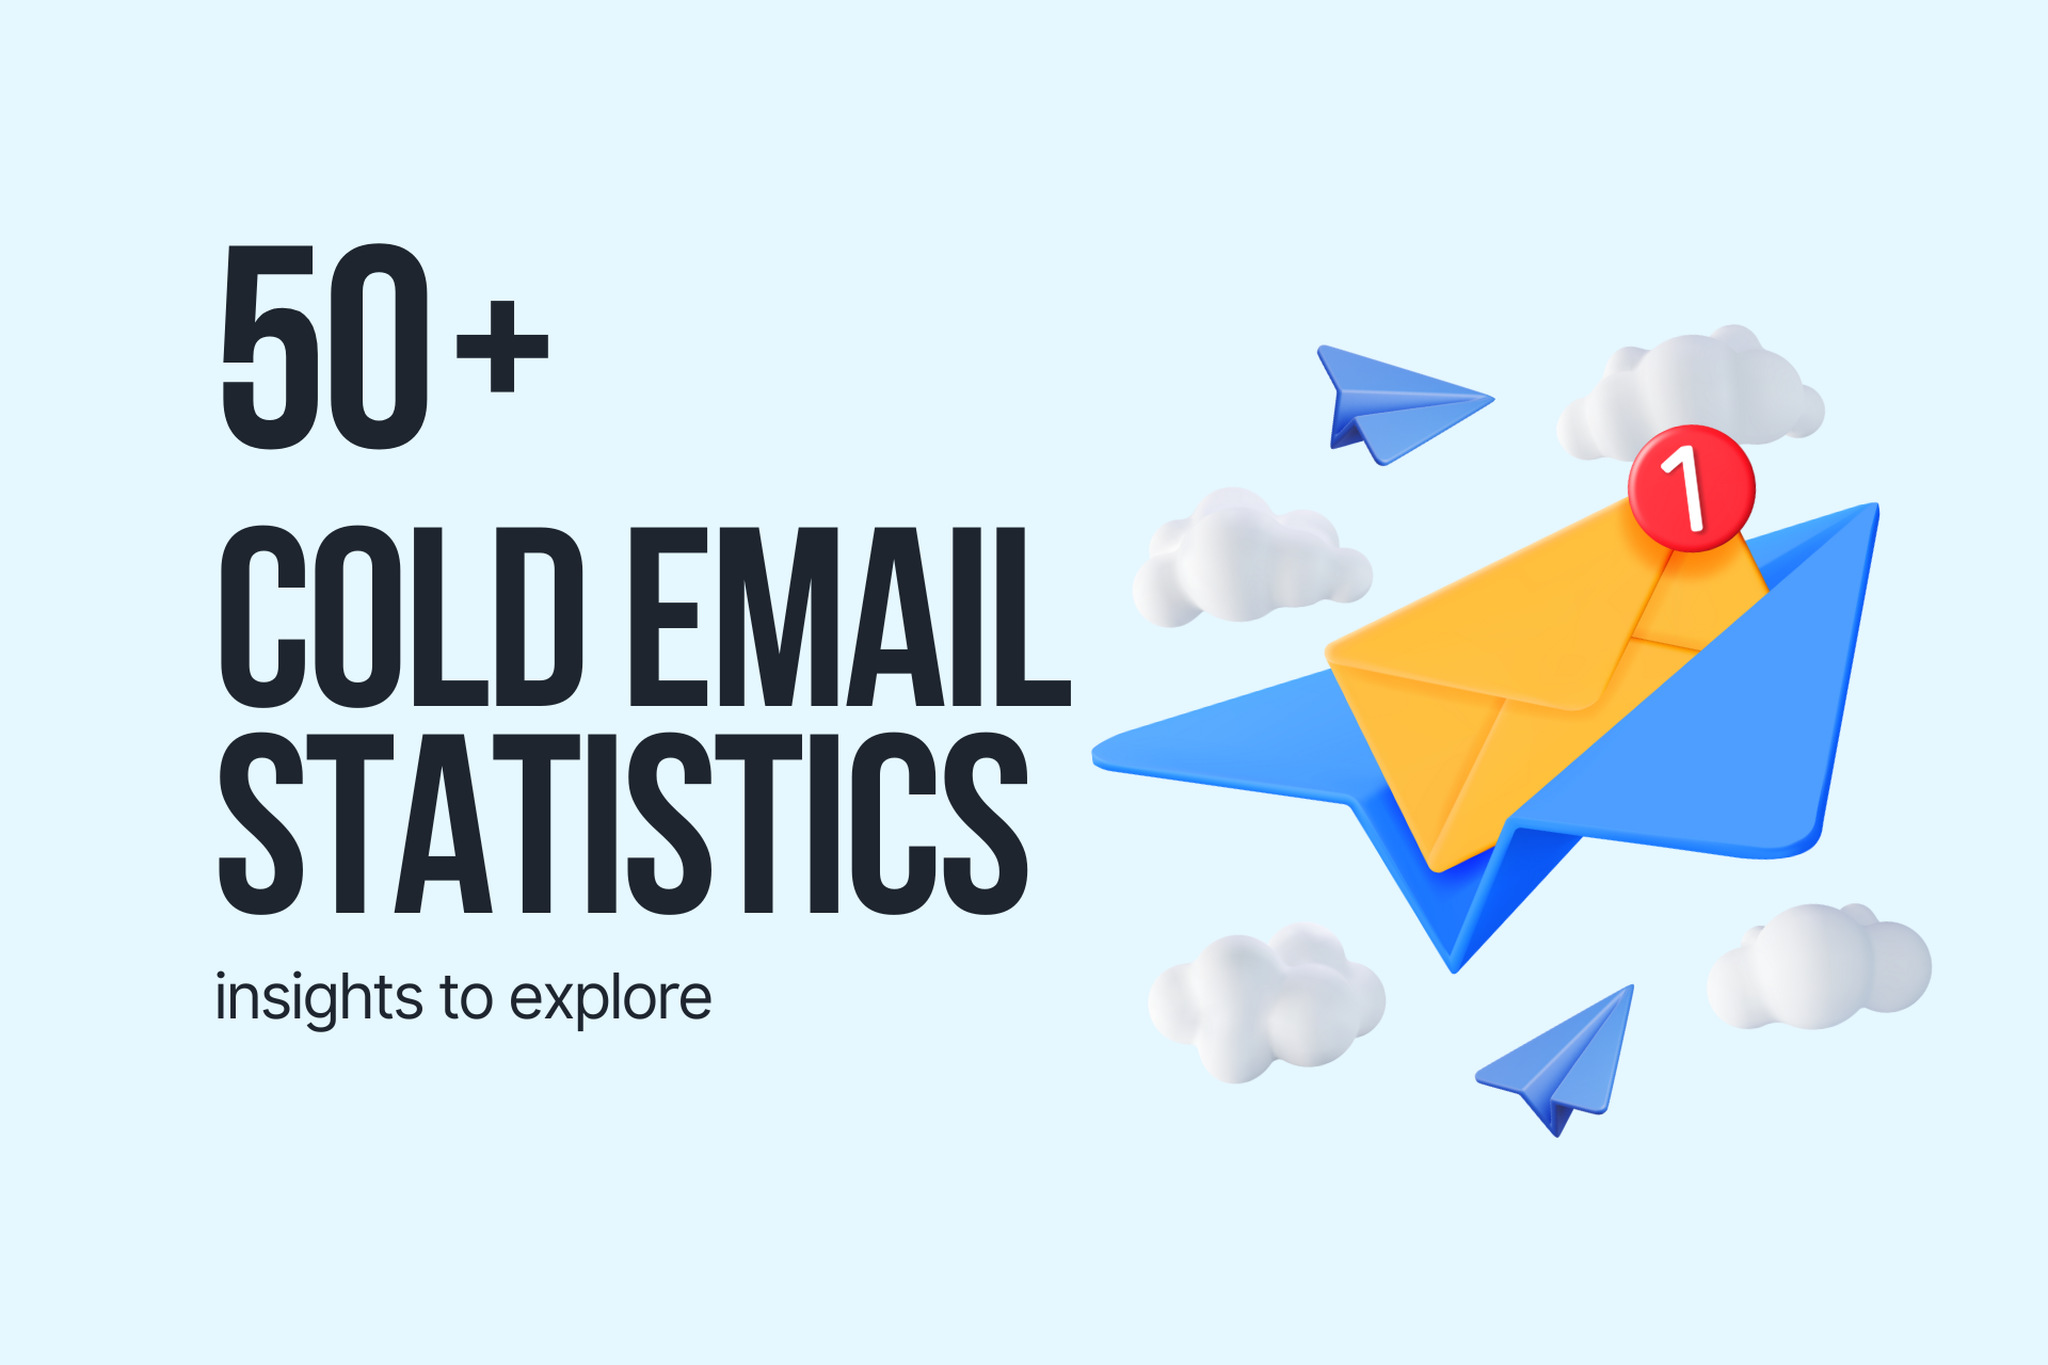 50+ Cold Email Statistics & Insights to Explore